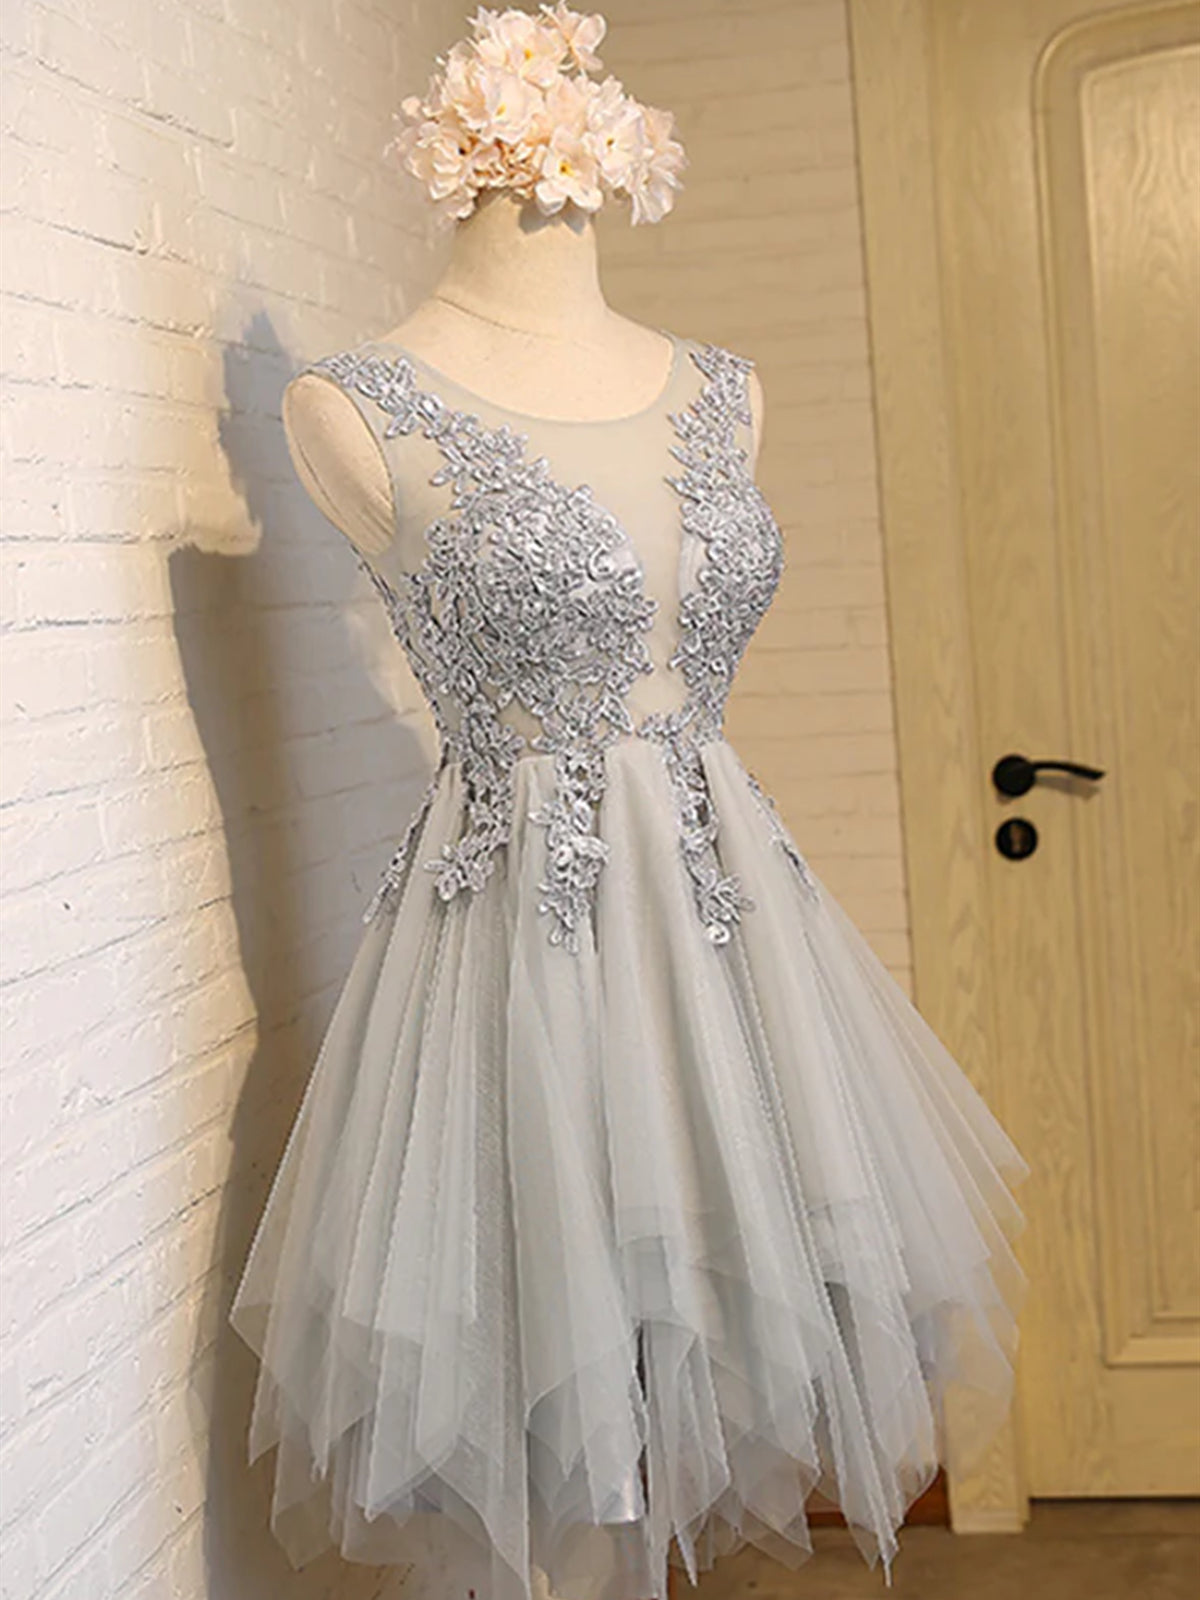 Round Neck Short Gray Lace Prom Dresses For Black girls For Women, Short Grey Lace Homecoming Dresses